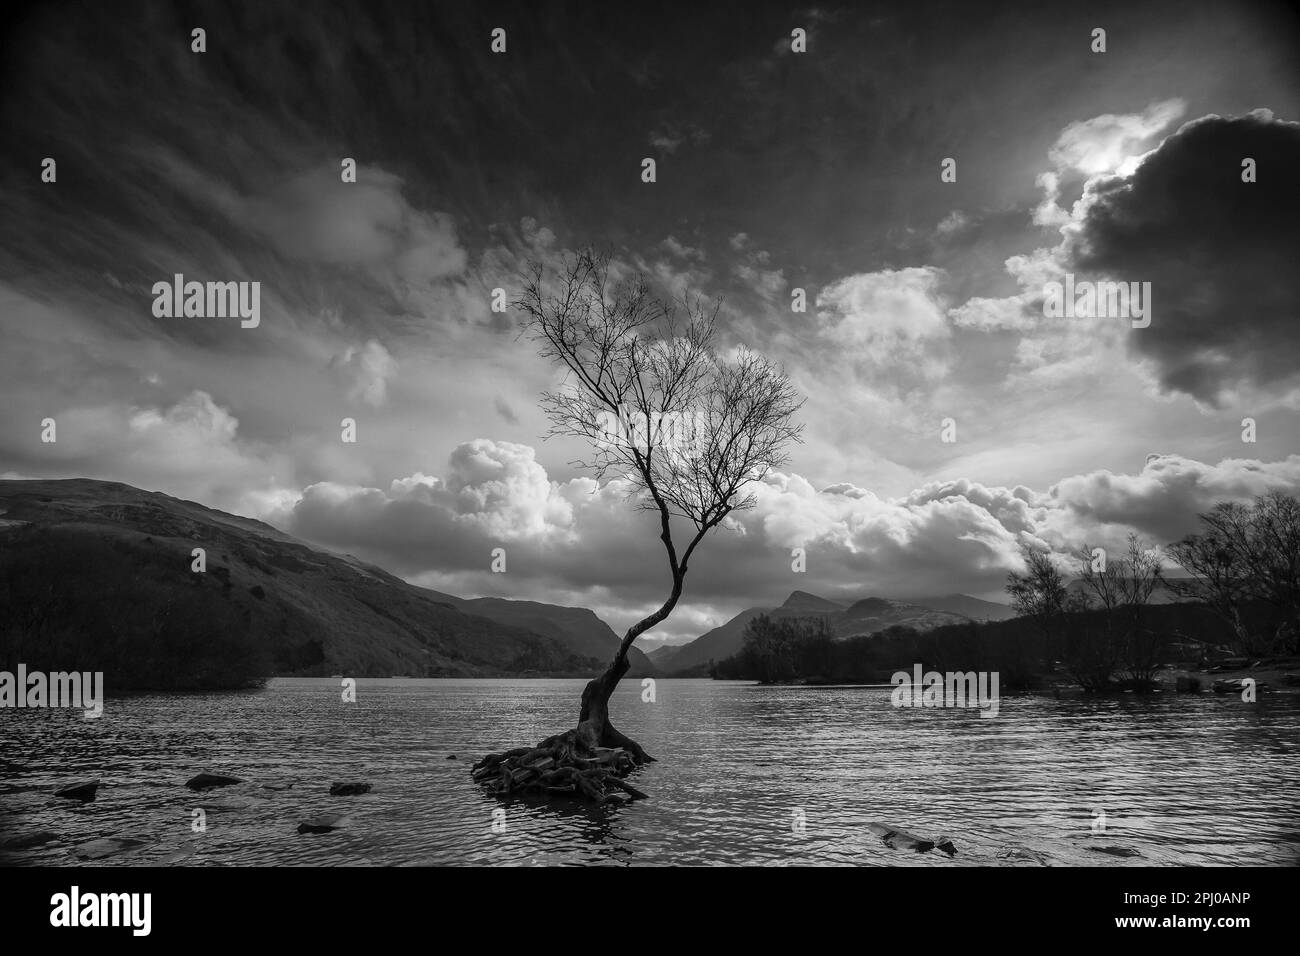 Moody landscape view across the water of Llyn Padarn, in North Wales, UK. Stock Photo